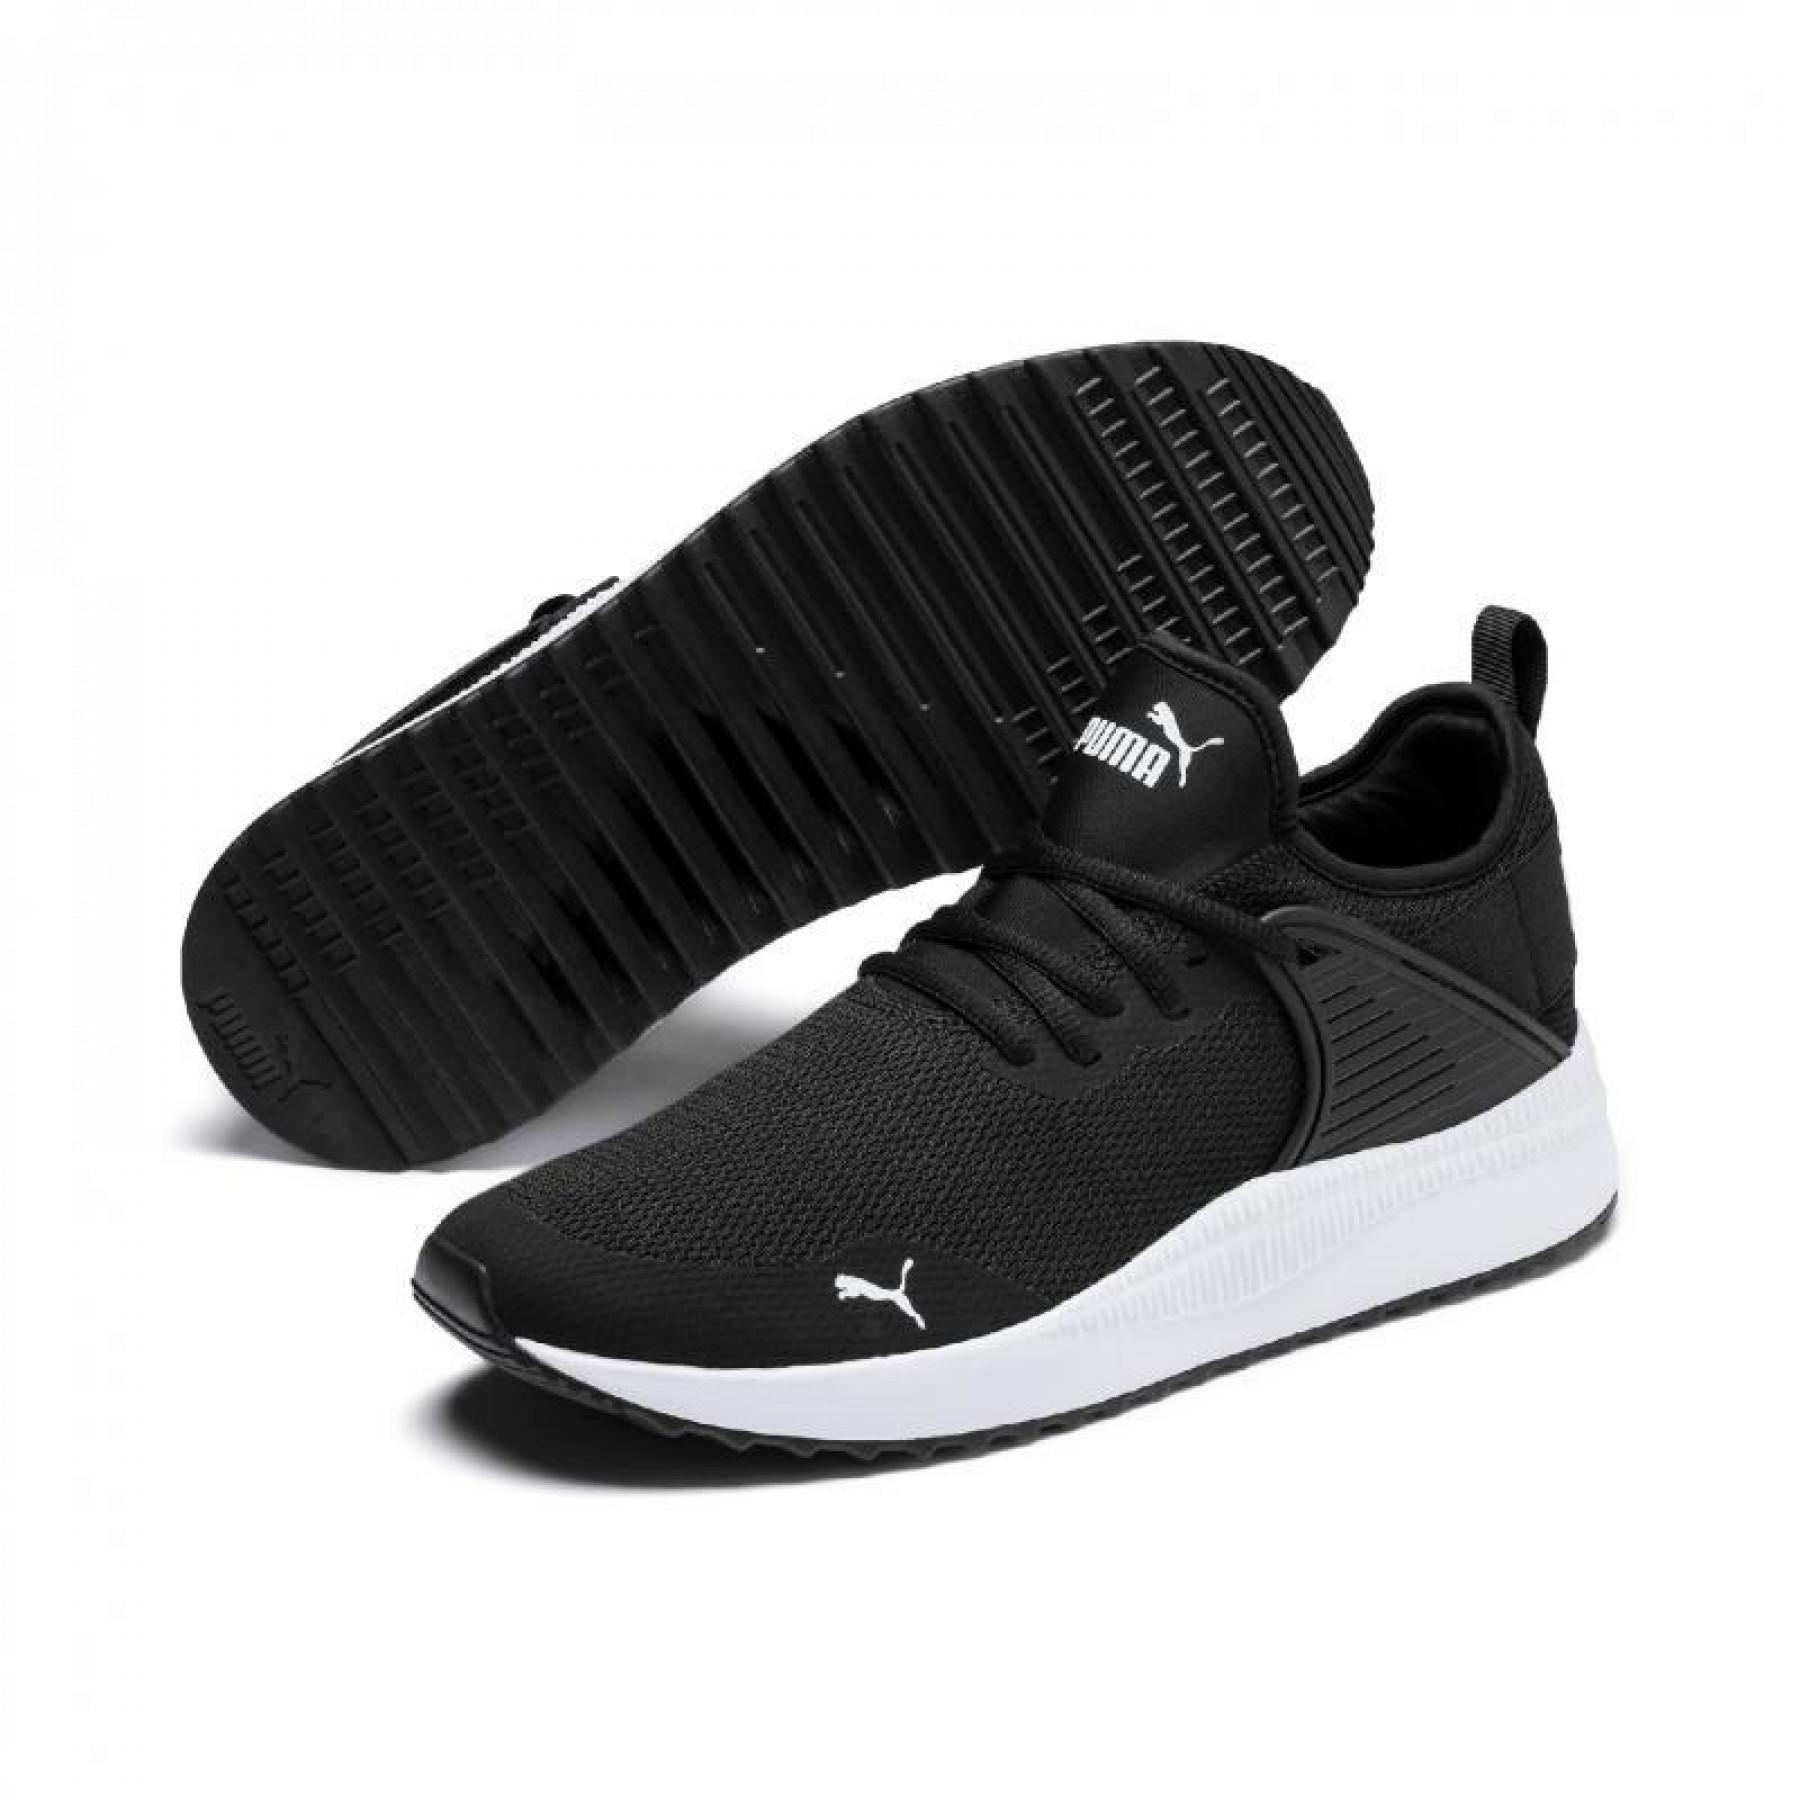 Chaussures de running Puma Pacer next cage core